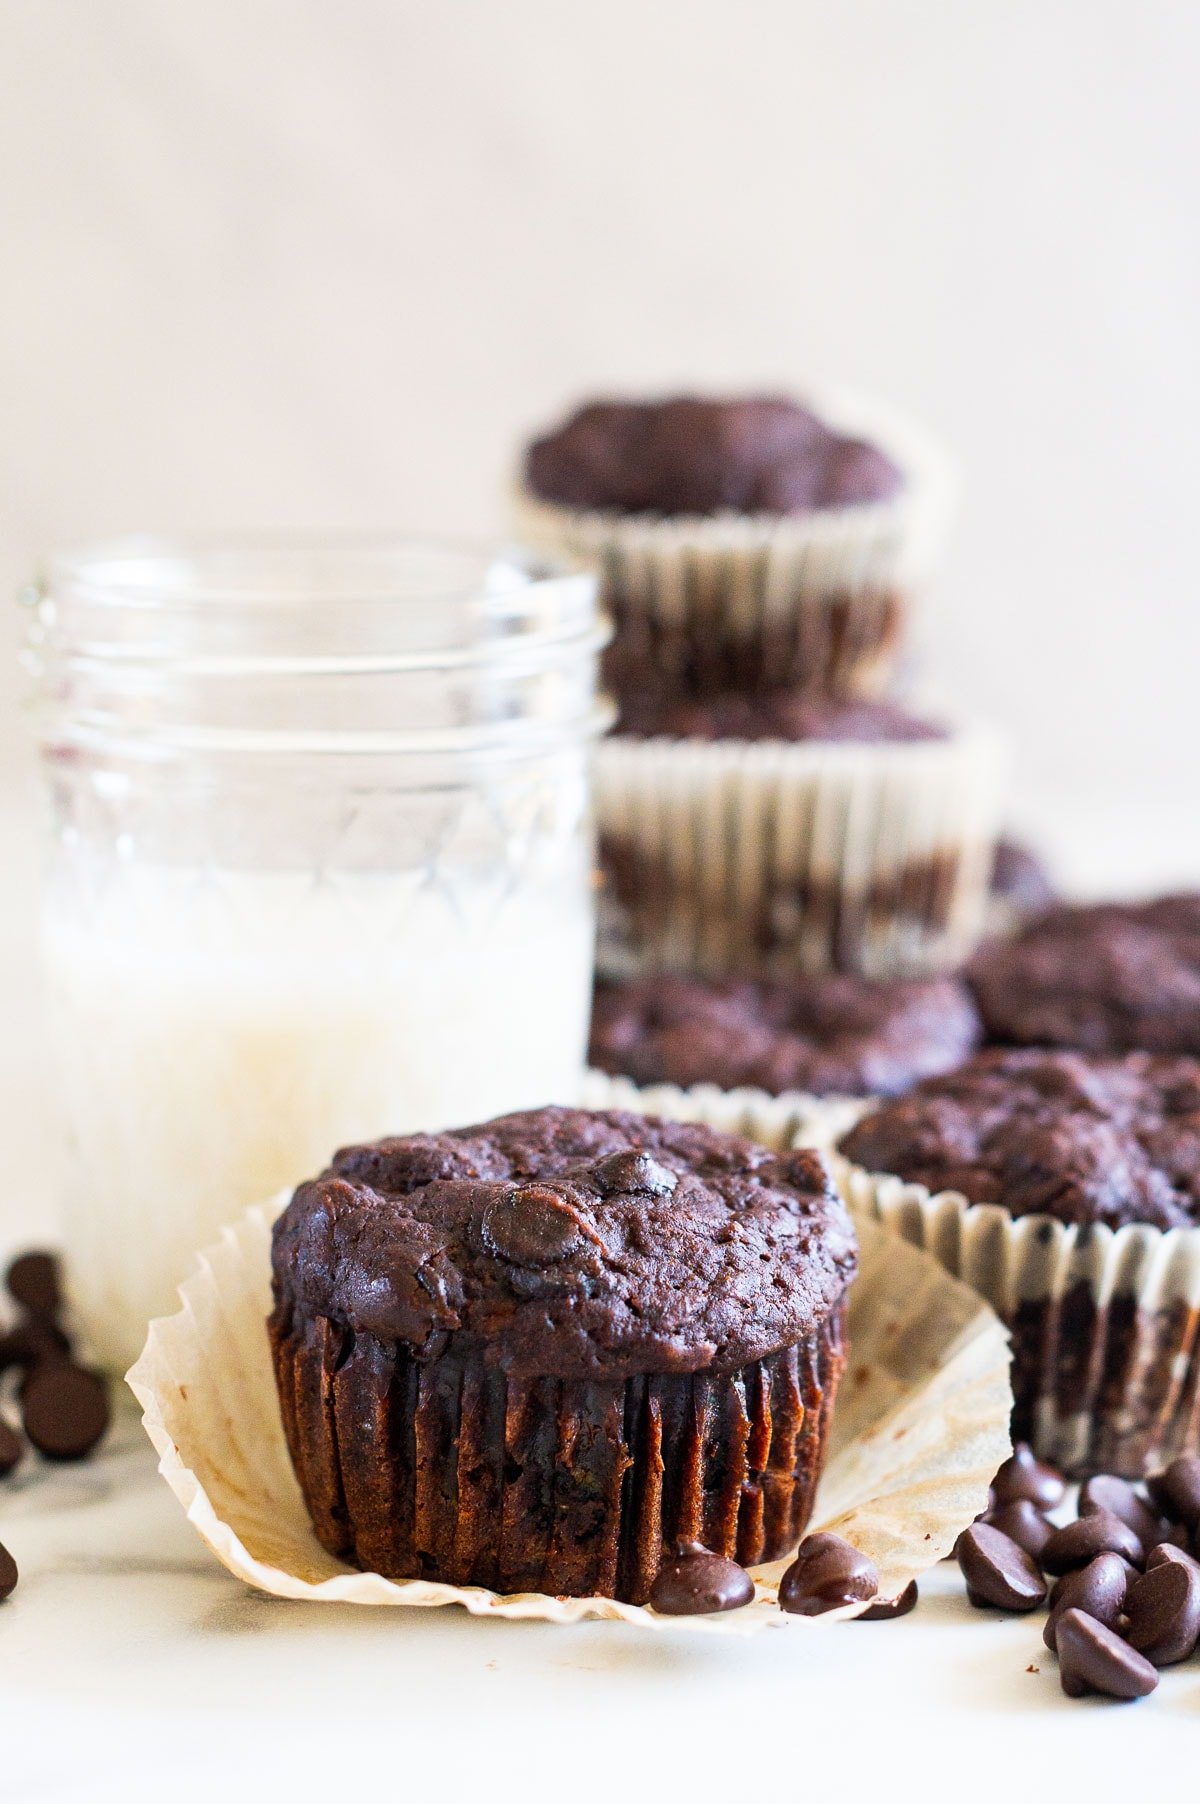 Zucchini chocolate muffin in a wrapper on a countertop surrounded by chocolate chips, muffins and a glass of milk.